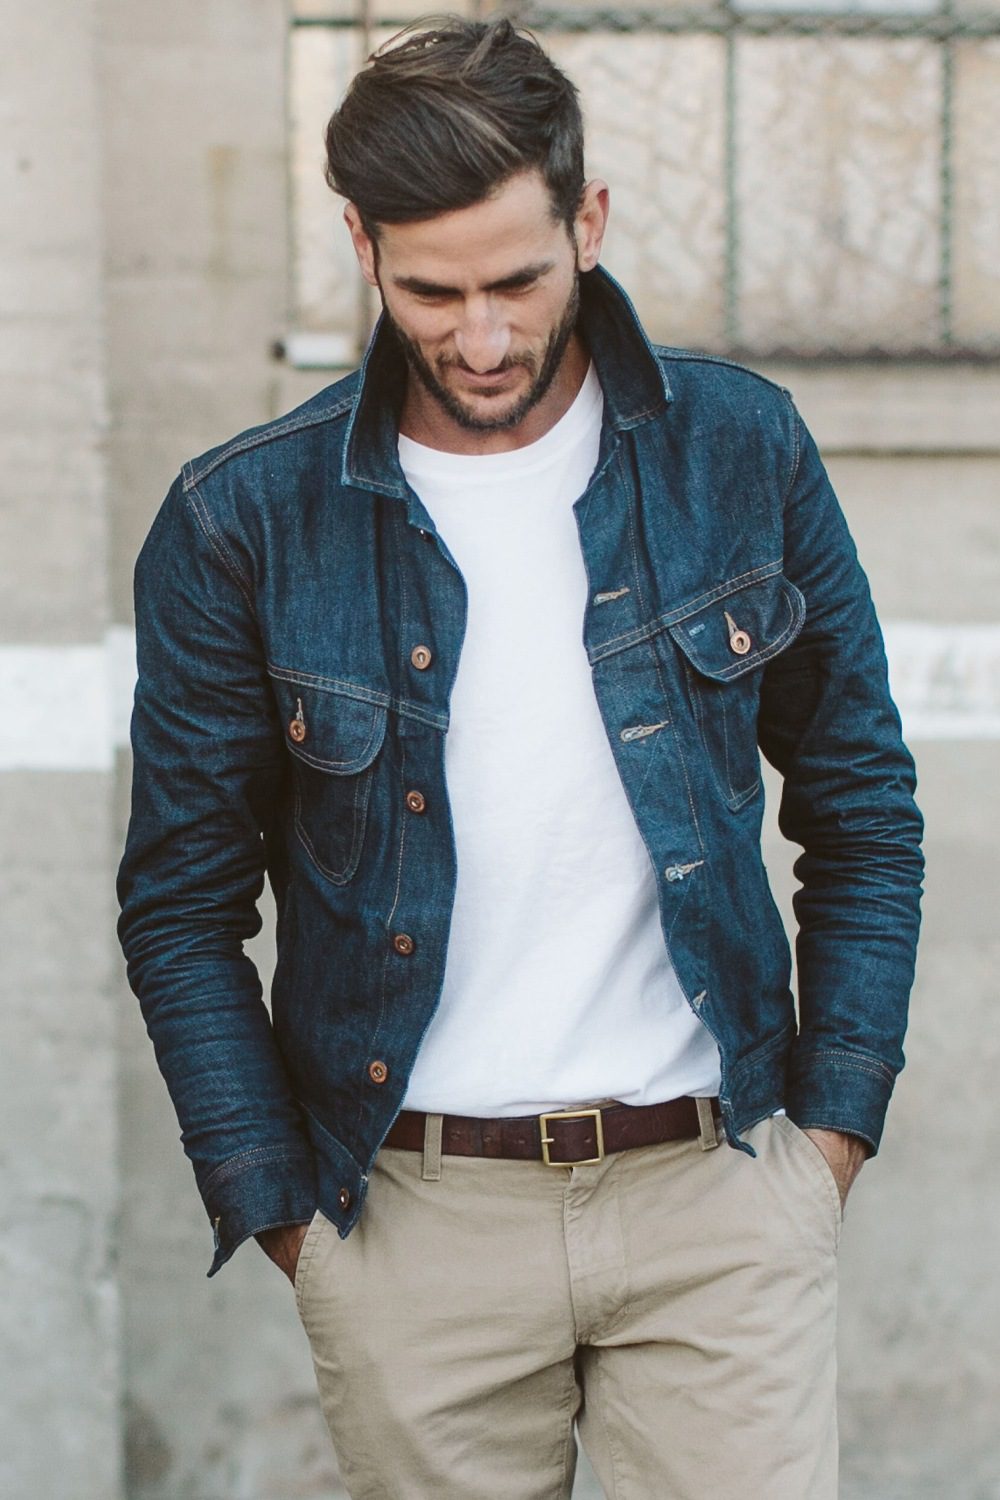 Jean Jacket Outfits for Men Master Denim Style